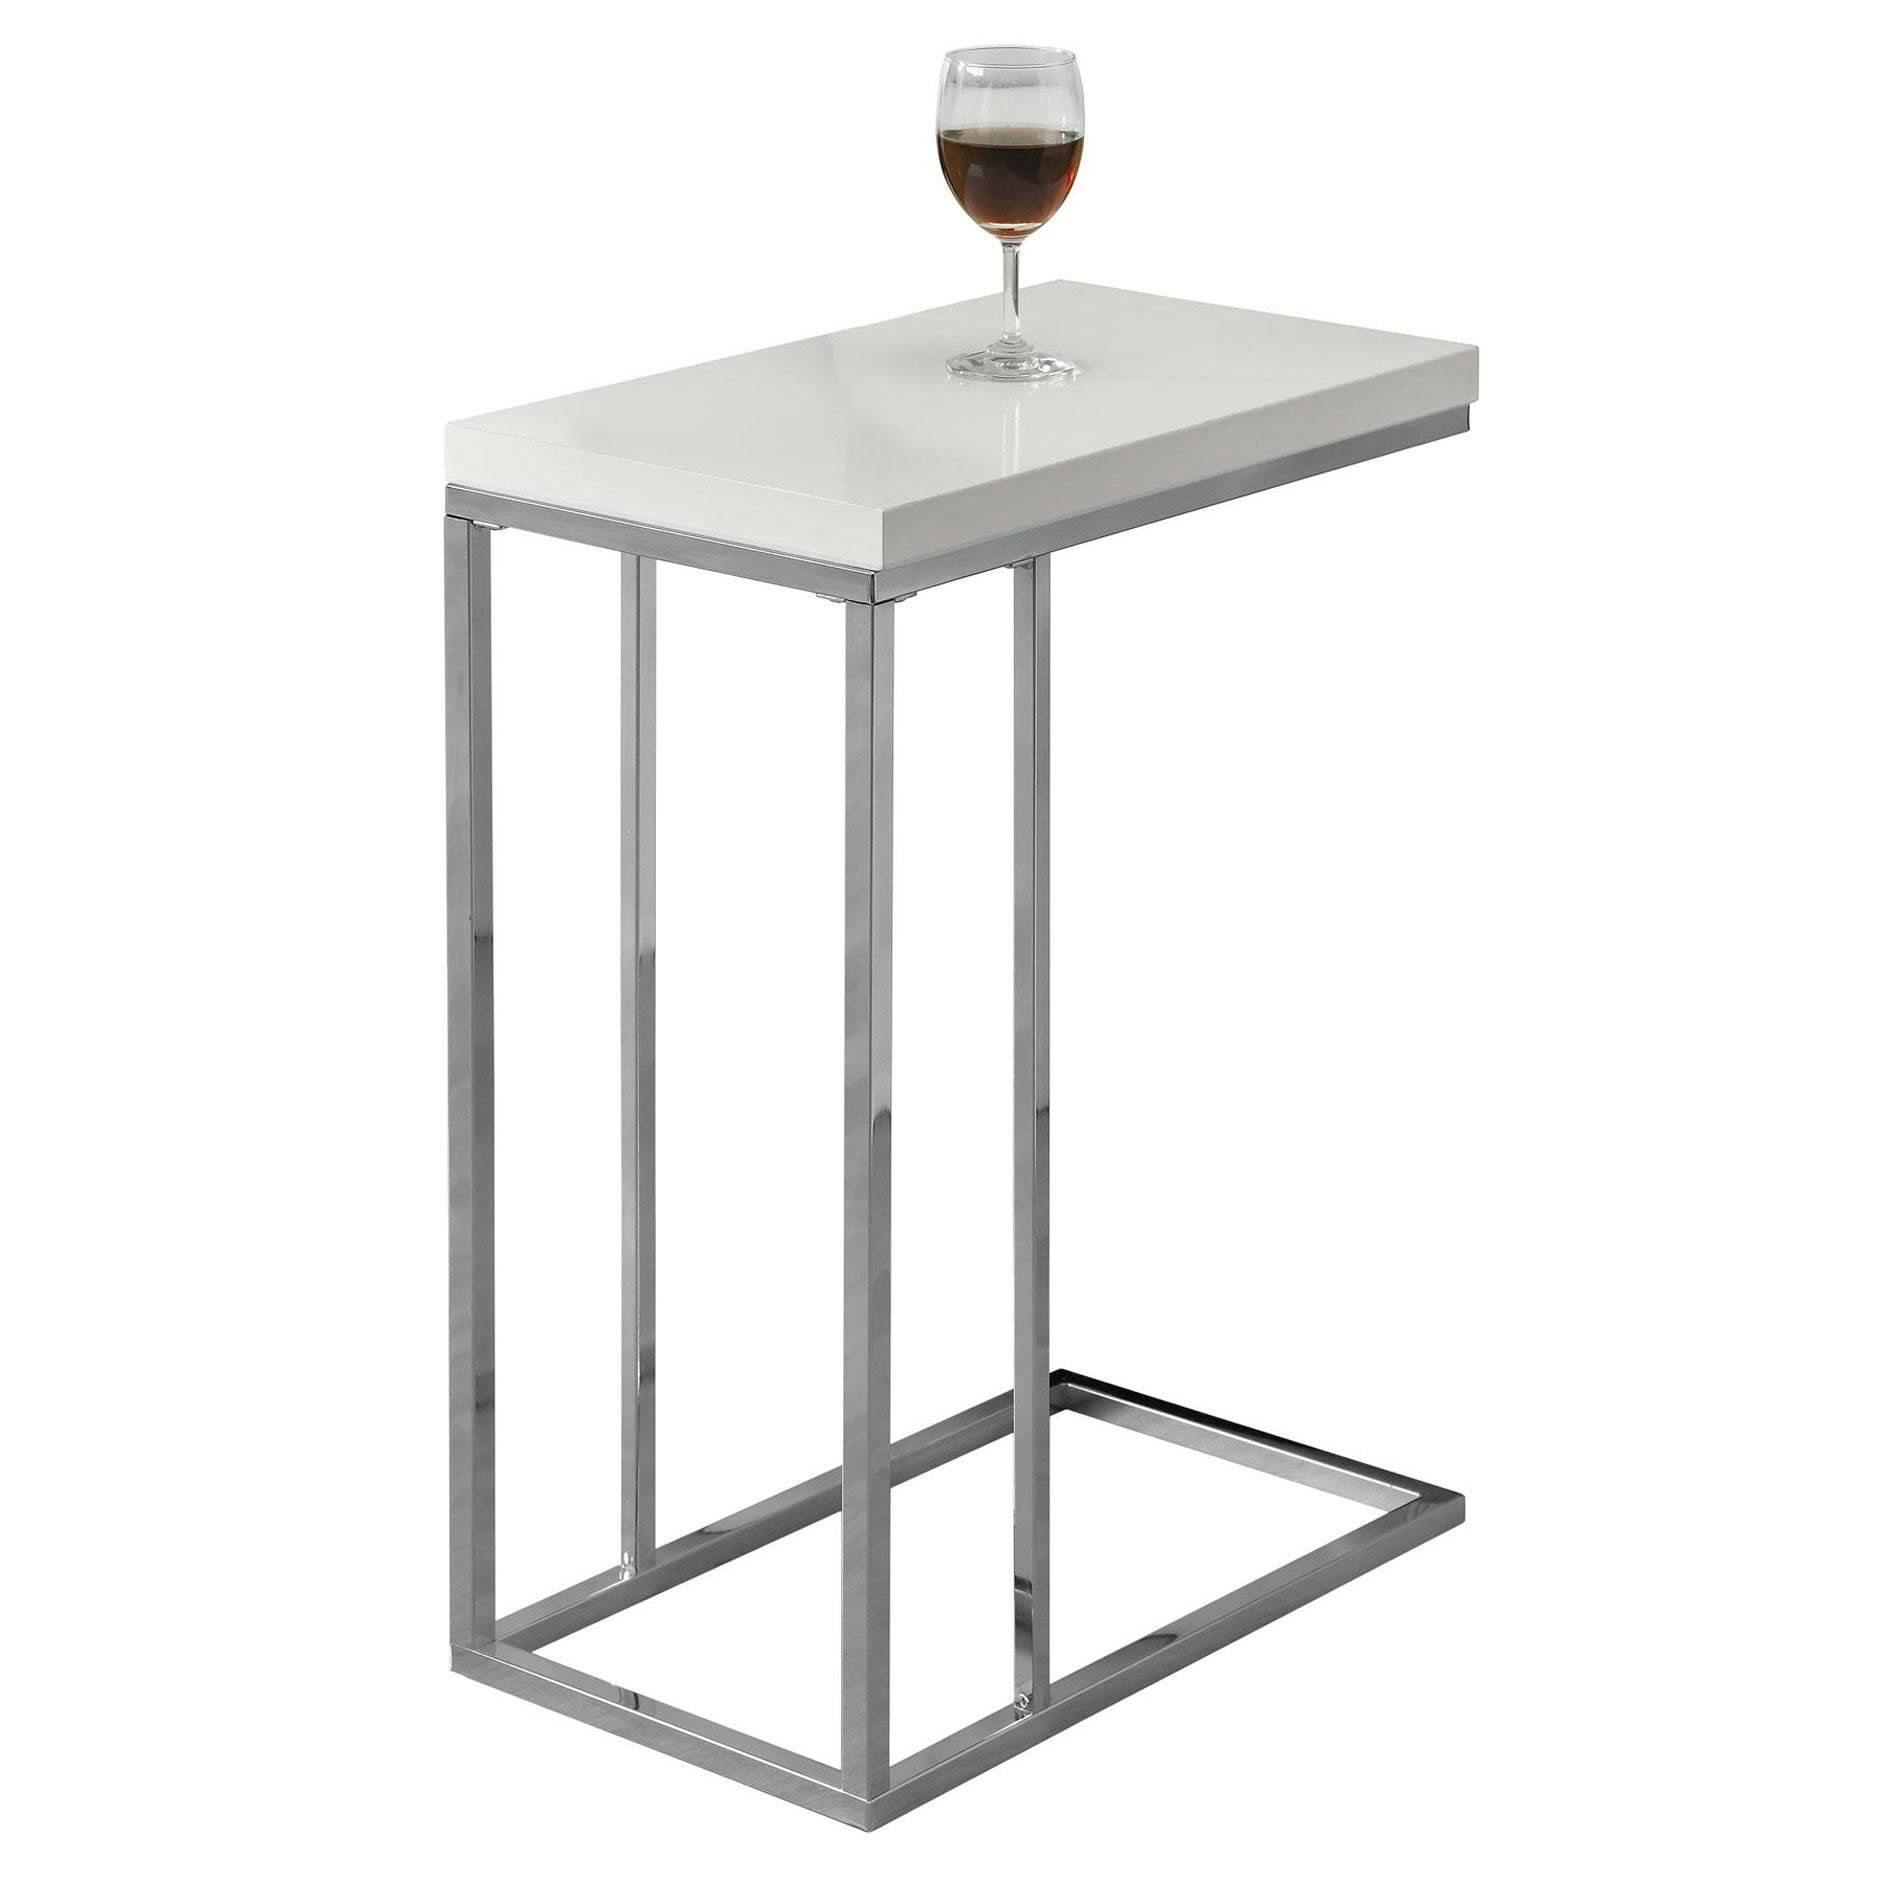 Glossy White Contemporary C-Shaped Metal & Wood Accent Table